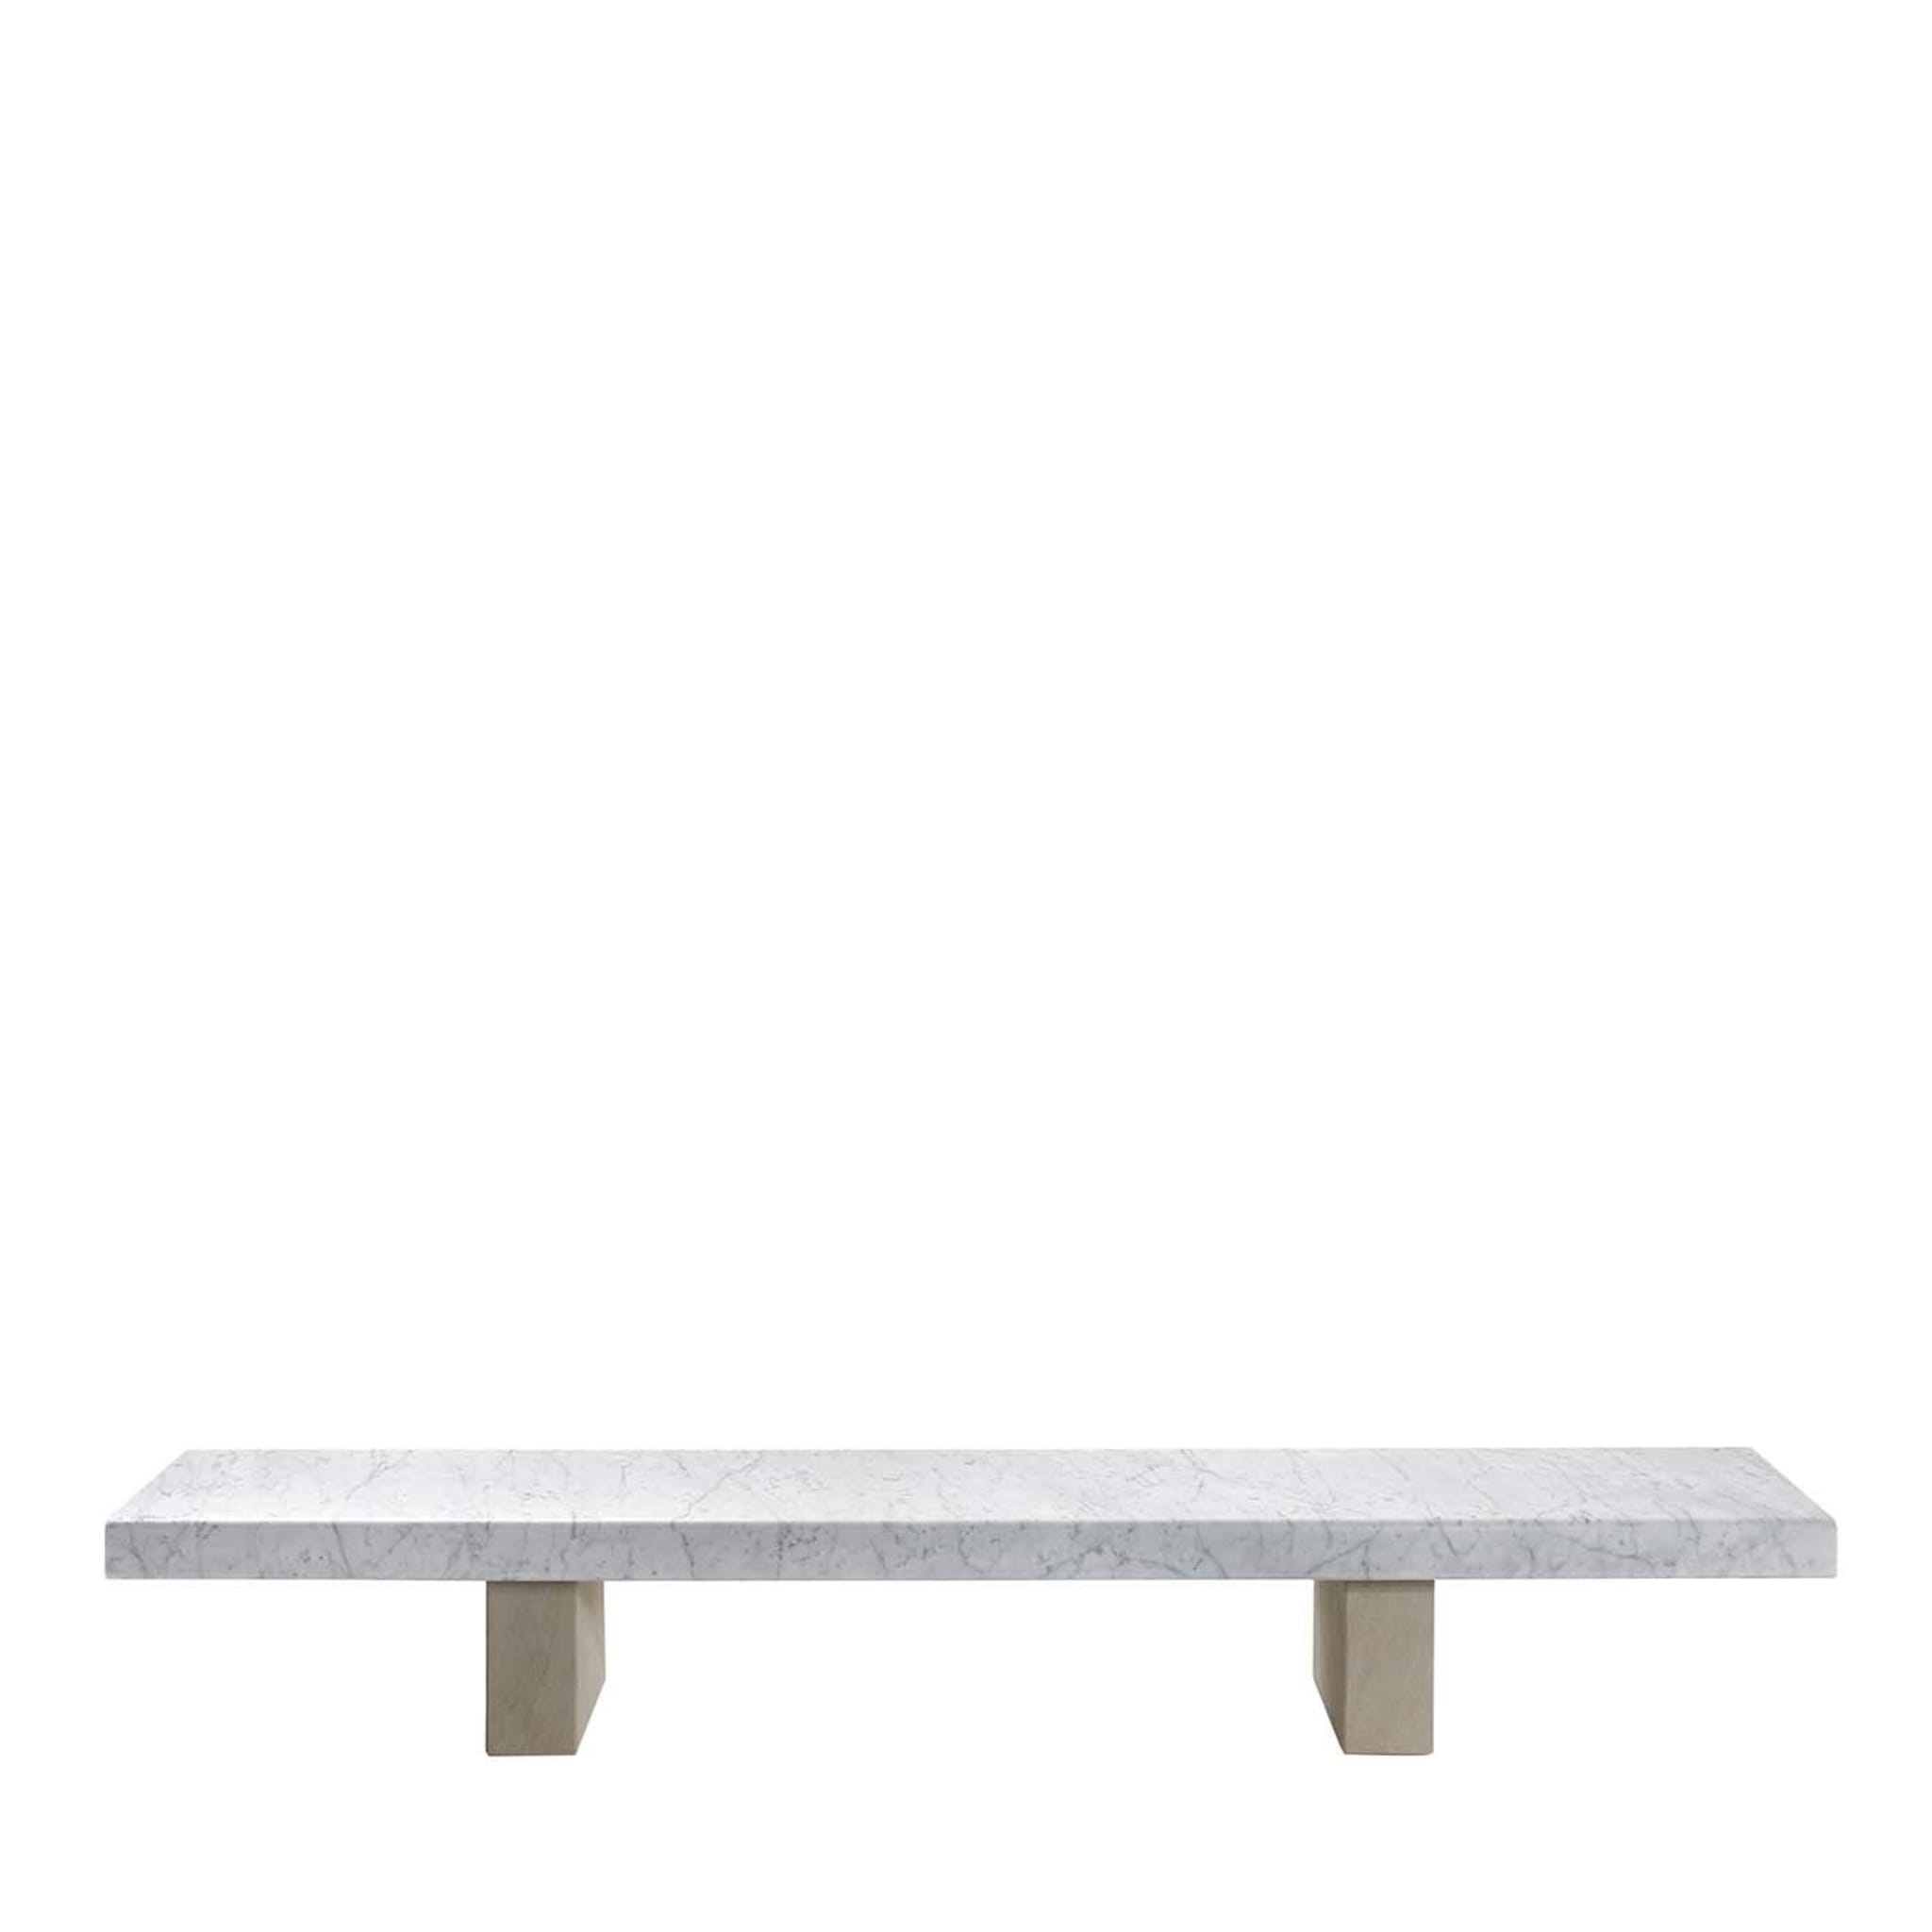 Span Outdoor Bench by John Pawson - Main view